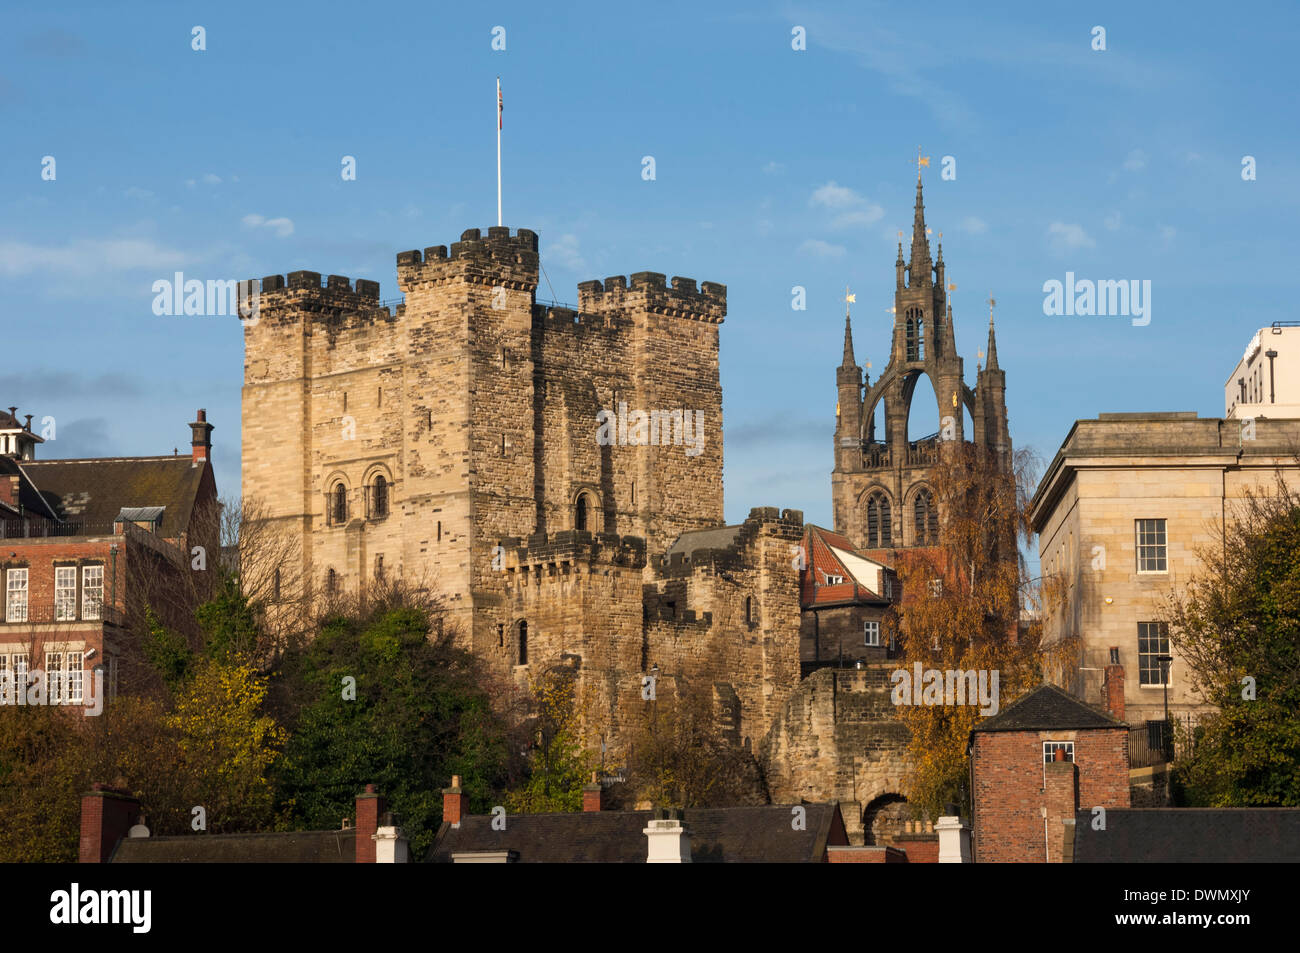 The 12th century Norman Castle Keep, and the Lantern of the Cathedral Church of St. Nicholas, Newcastle upon Tyne, England, UK Stock Photo